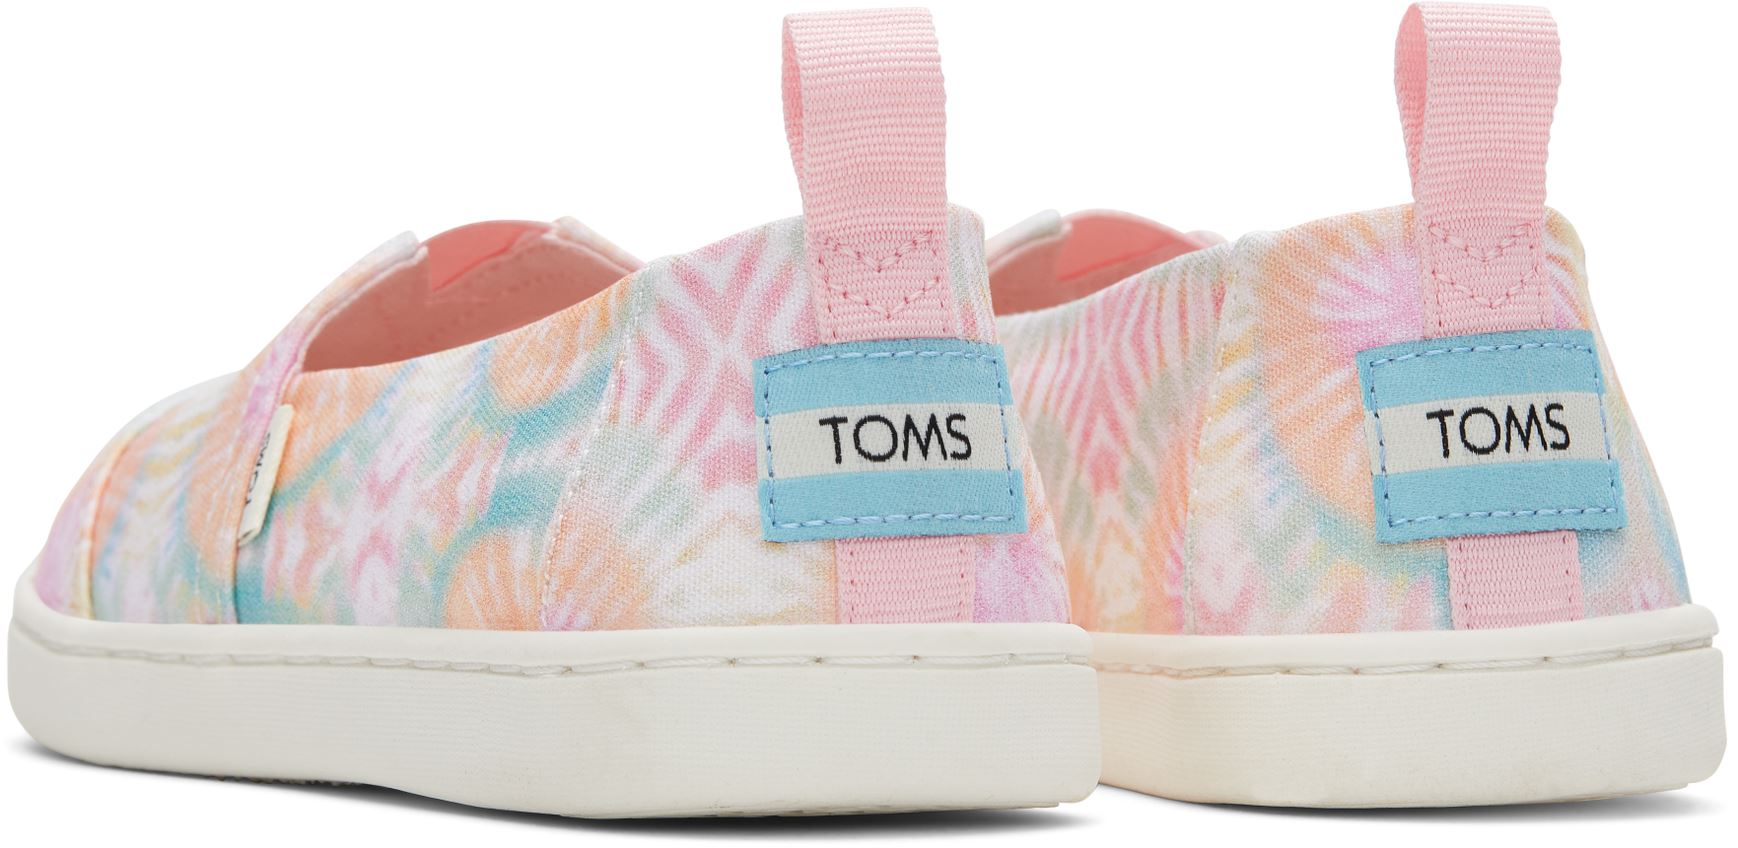 A girls canvas shoe by TOMS, style Alpargata, a slip on in Candy Pink Tie Dye. Rear view of a pair.